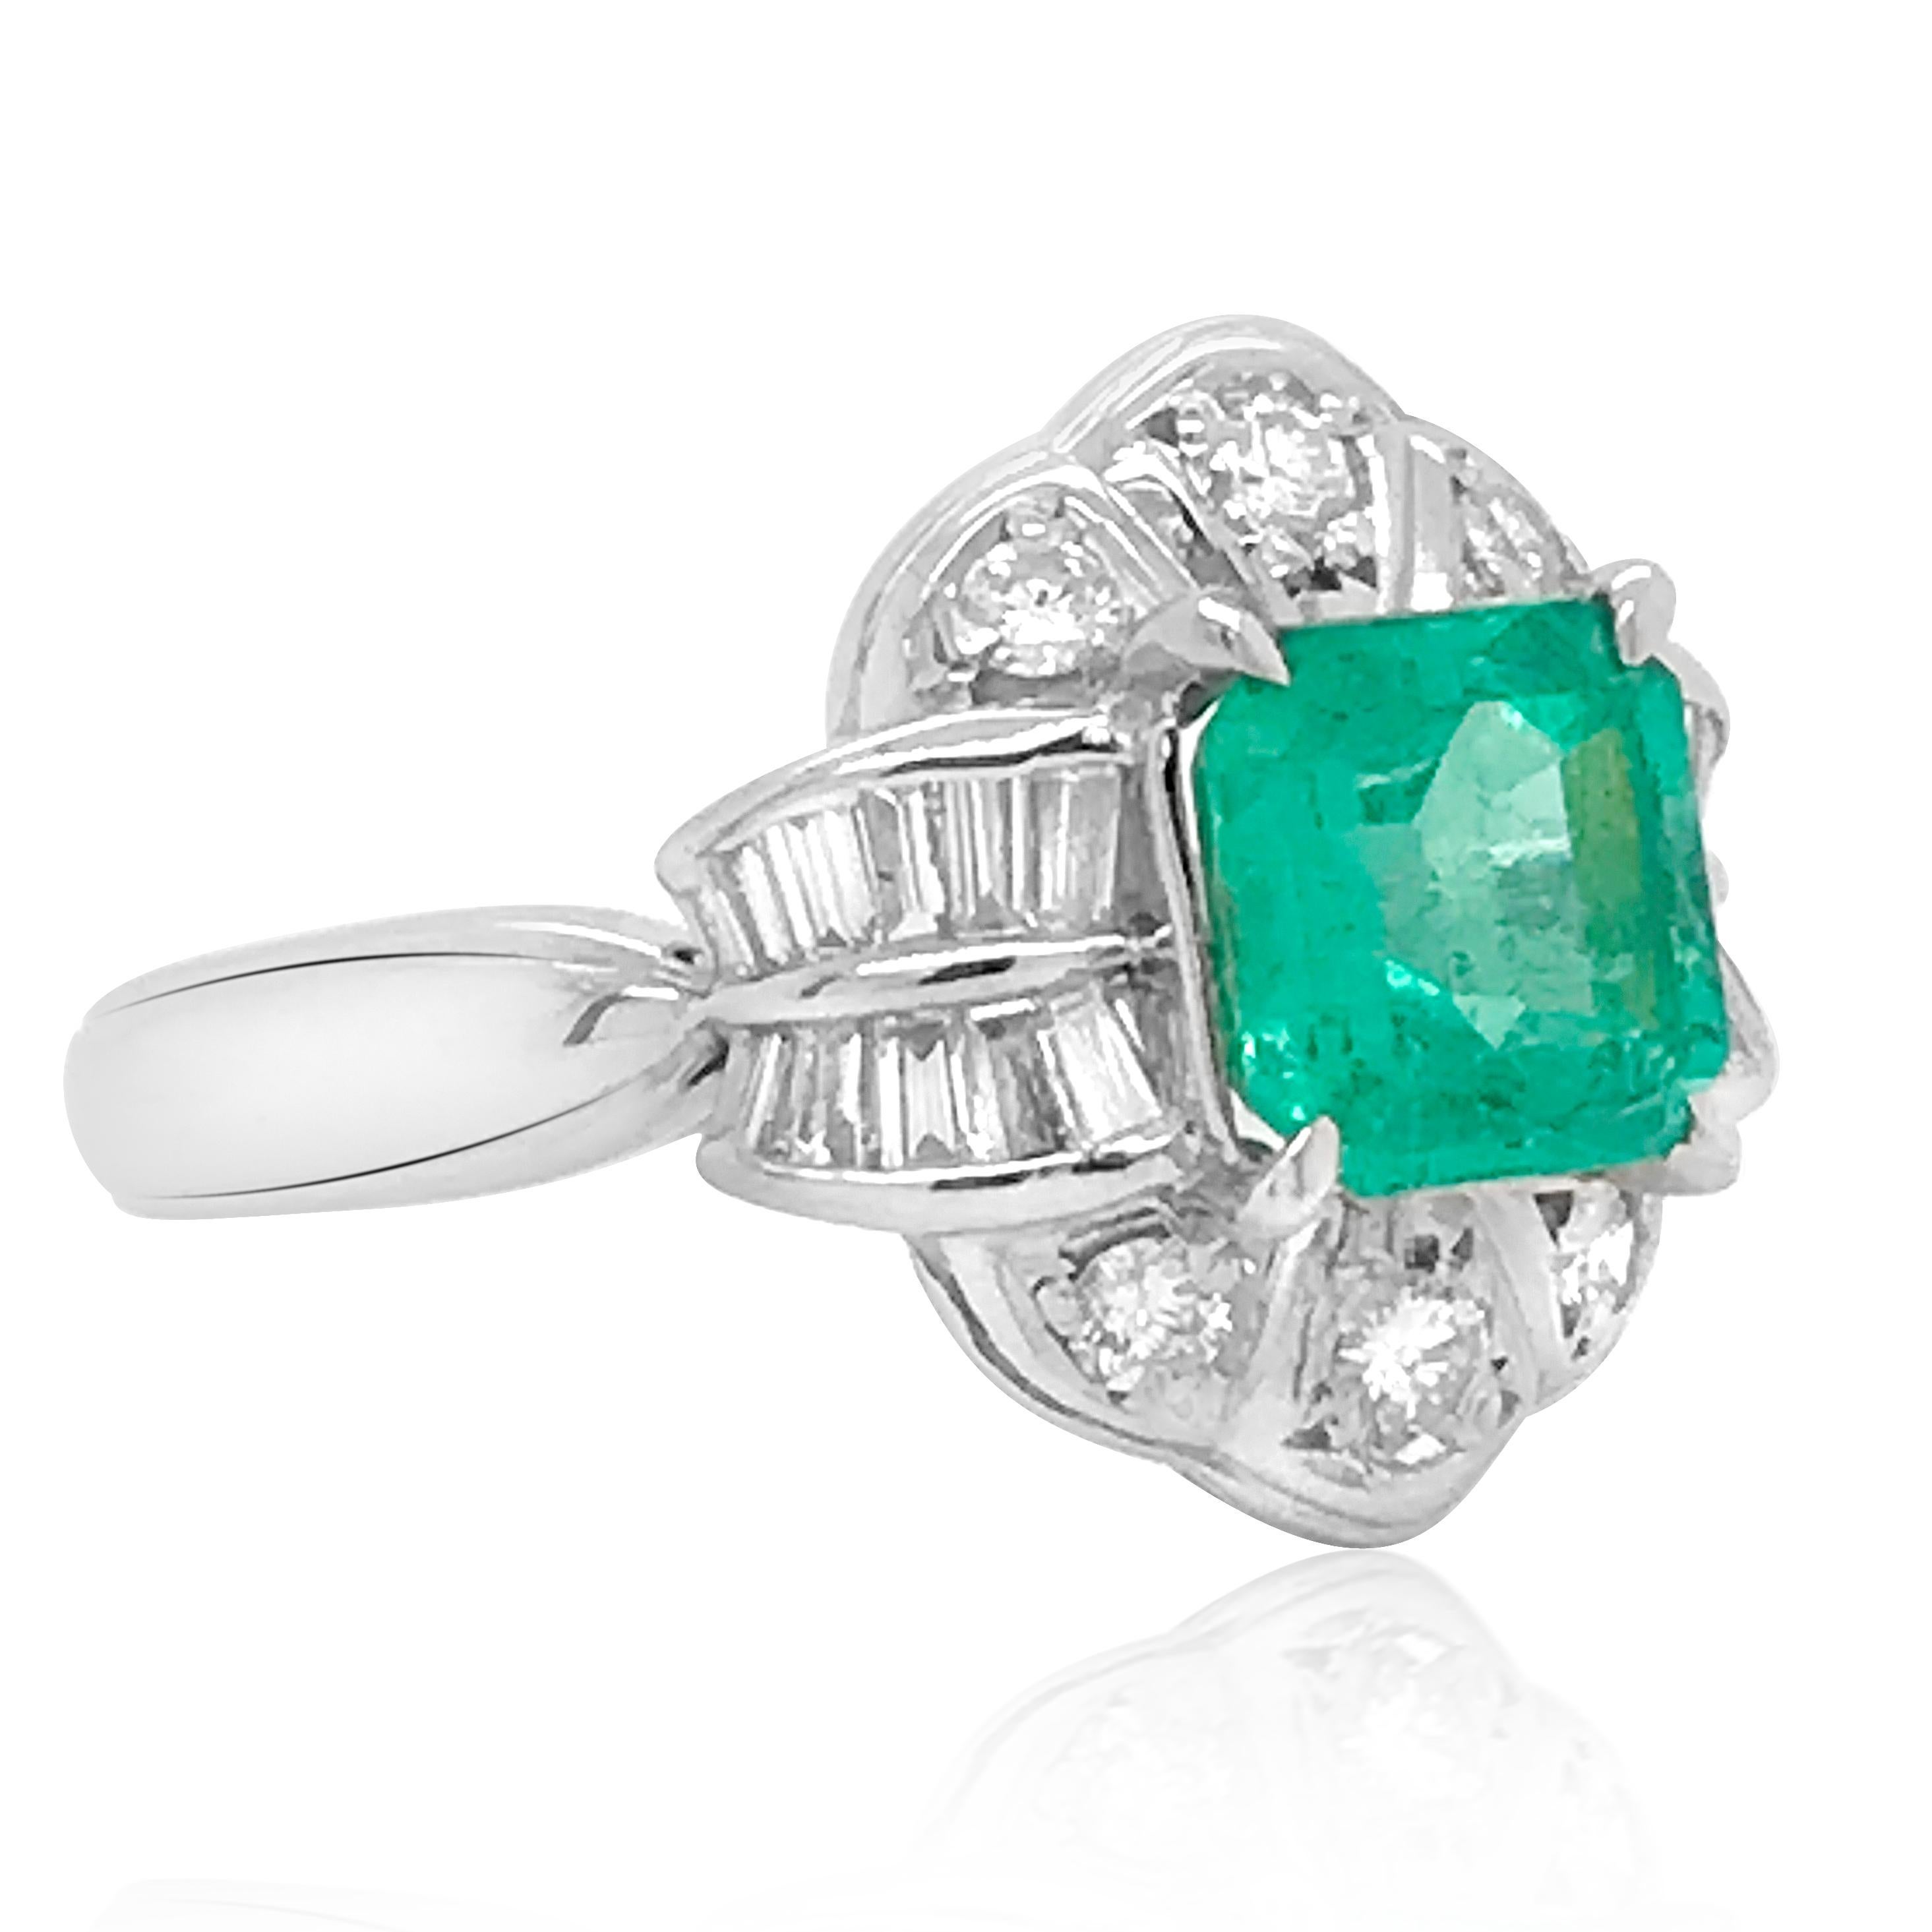 This alluring vintage emerald ring crafted is in solid platinum. Centering with an emerald of approx. 1.25 carats, enhanced by approx. 0.51ct diamonds, this impressive cocktail ring weighs 7.12 grams, measures in size 6.25 (adjustable) and remains